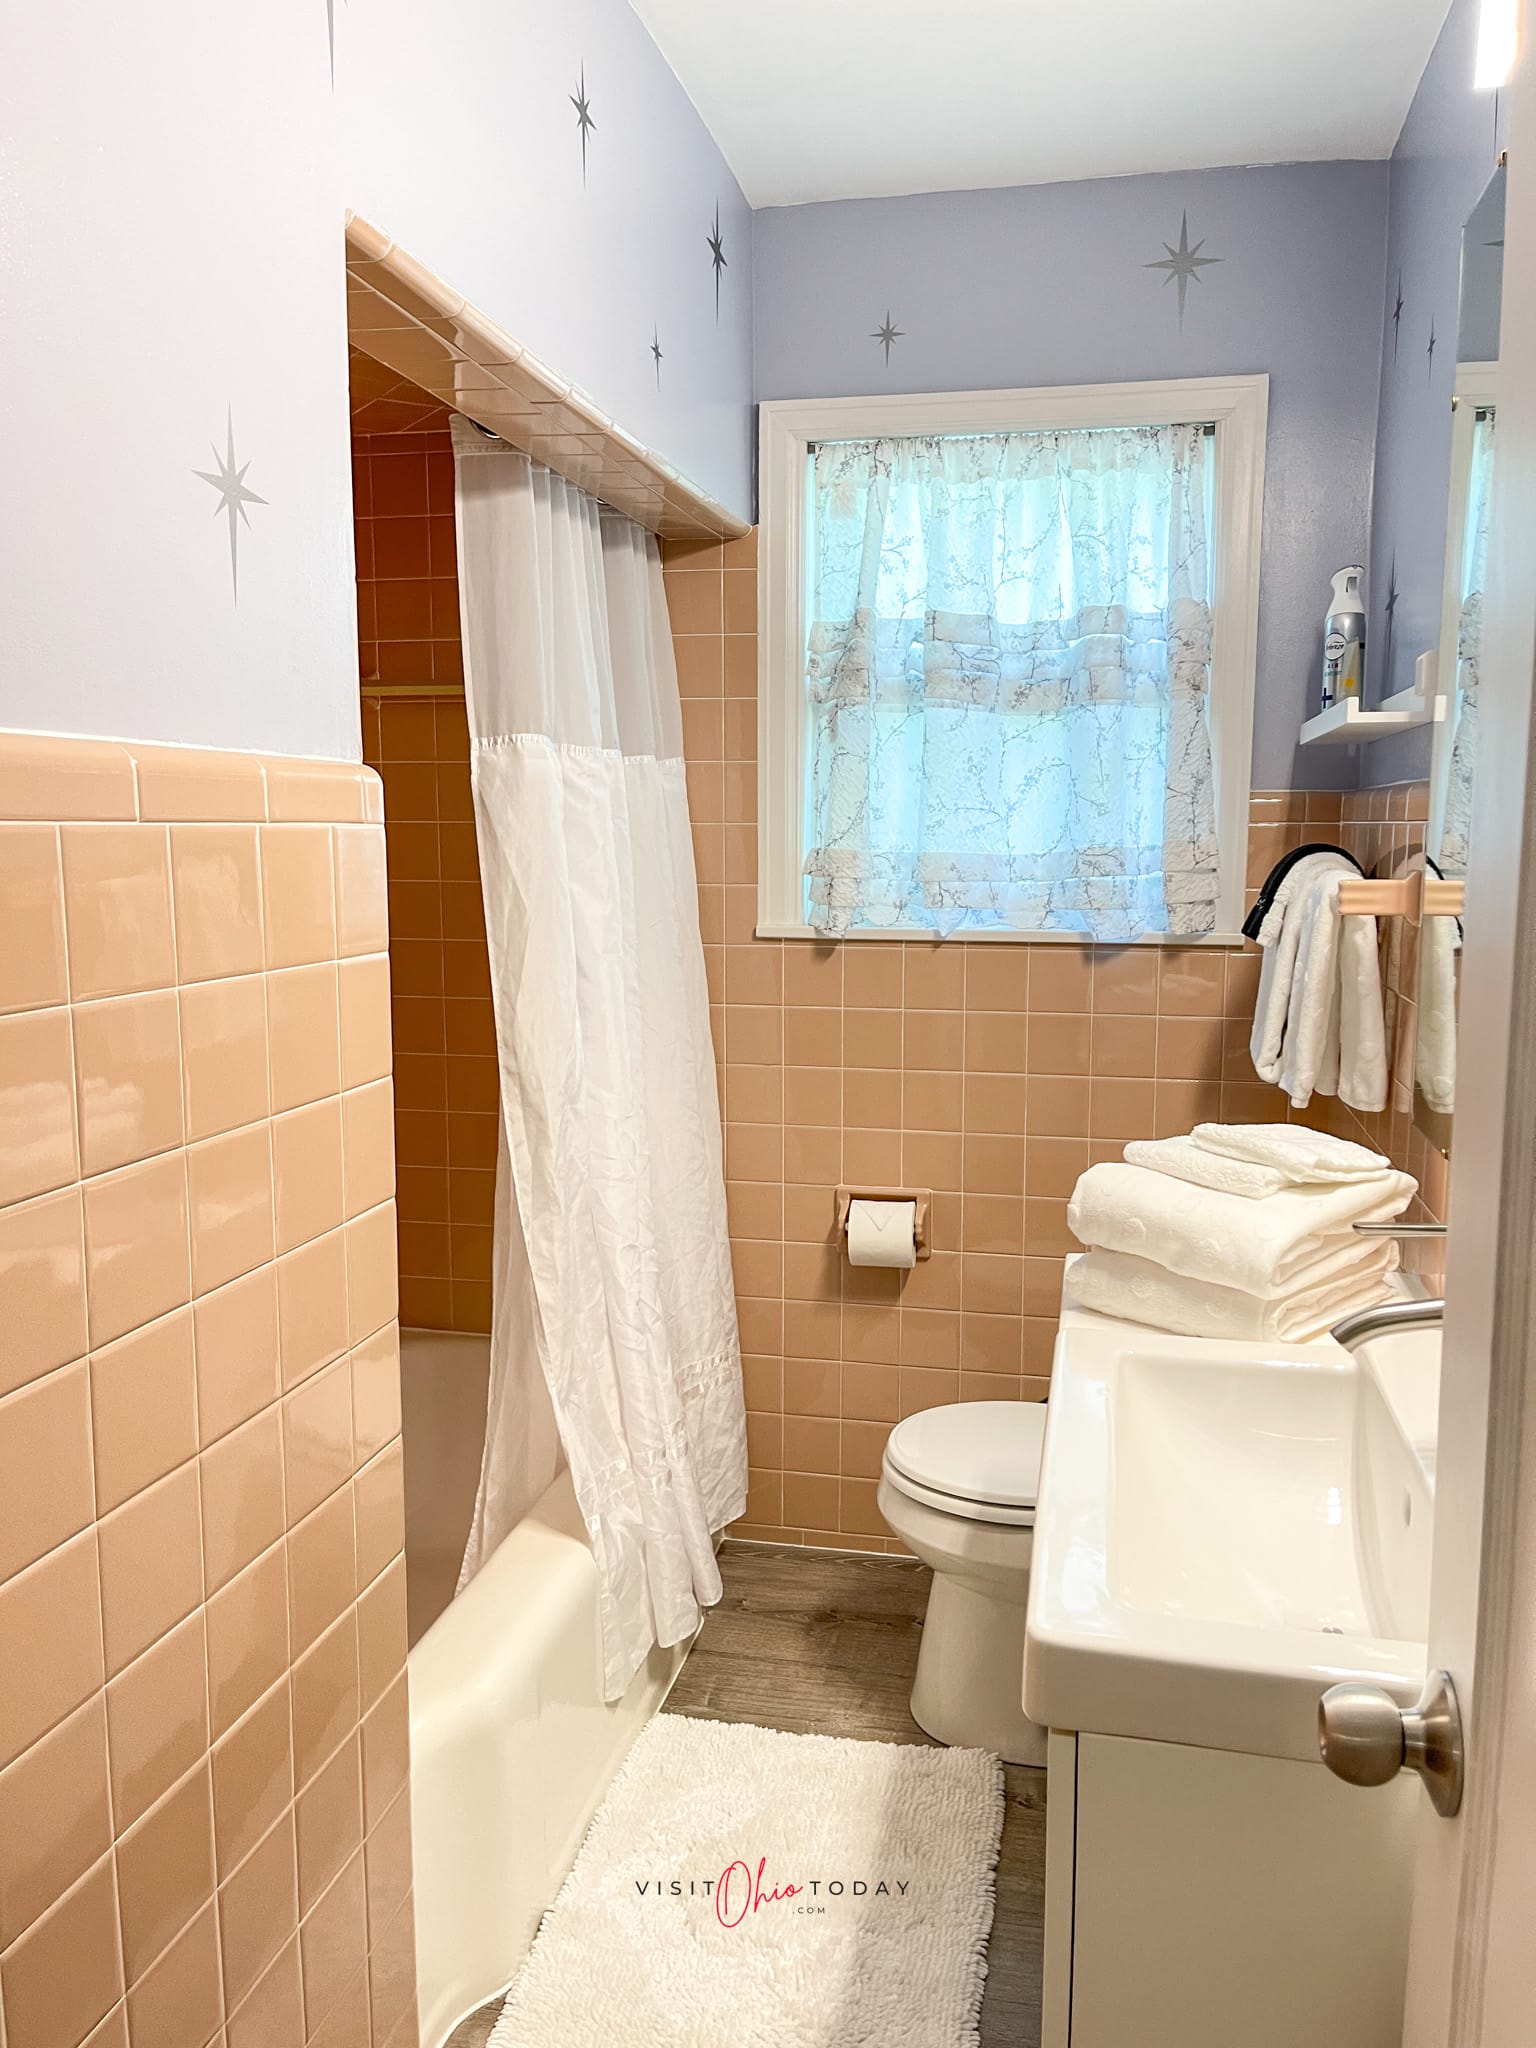 light pink tiled bathroom on tub and floors, light purple paint on walls with silver stars (all on left) on the right is a white skinny sink, white towels and toilet